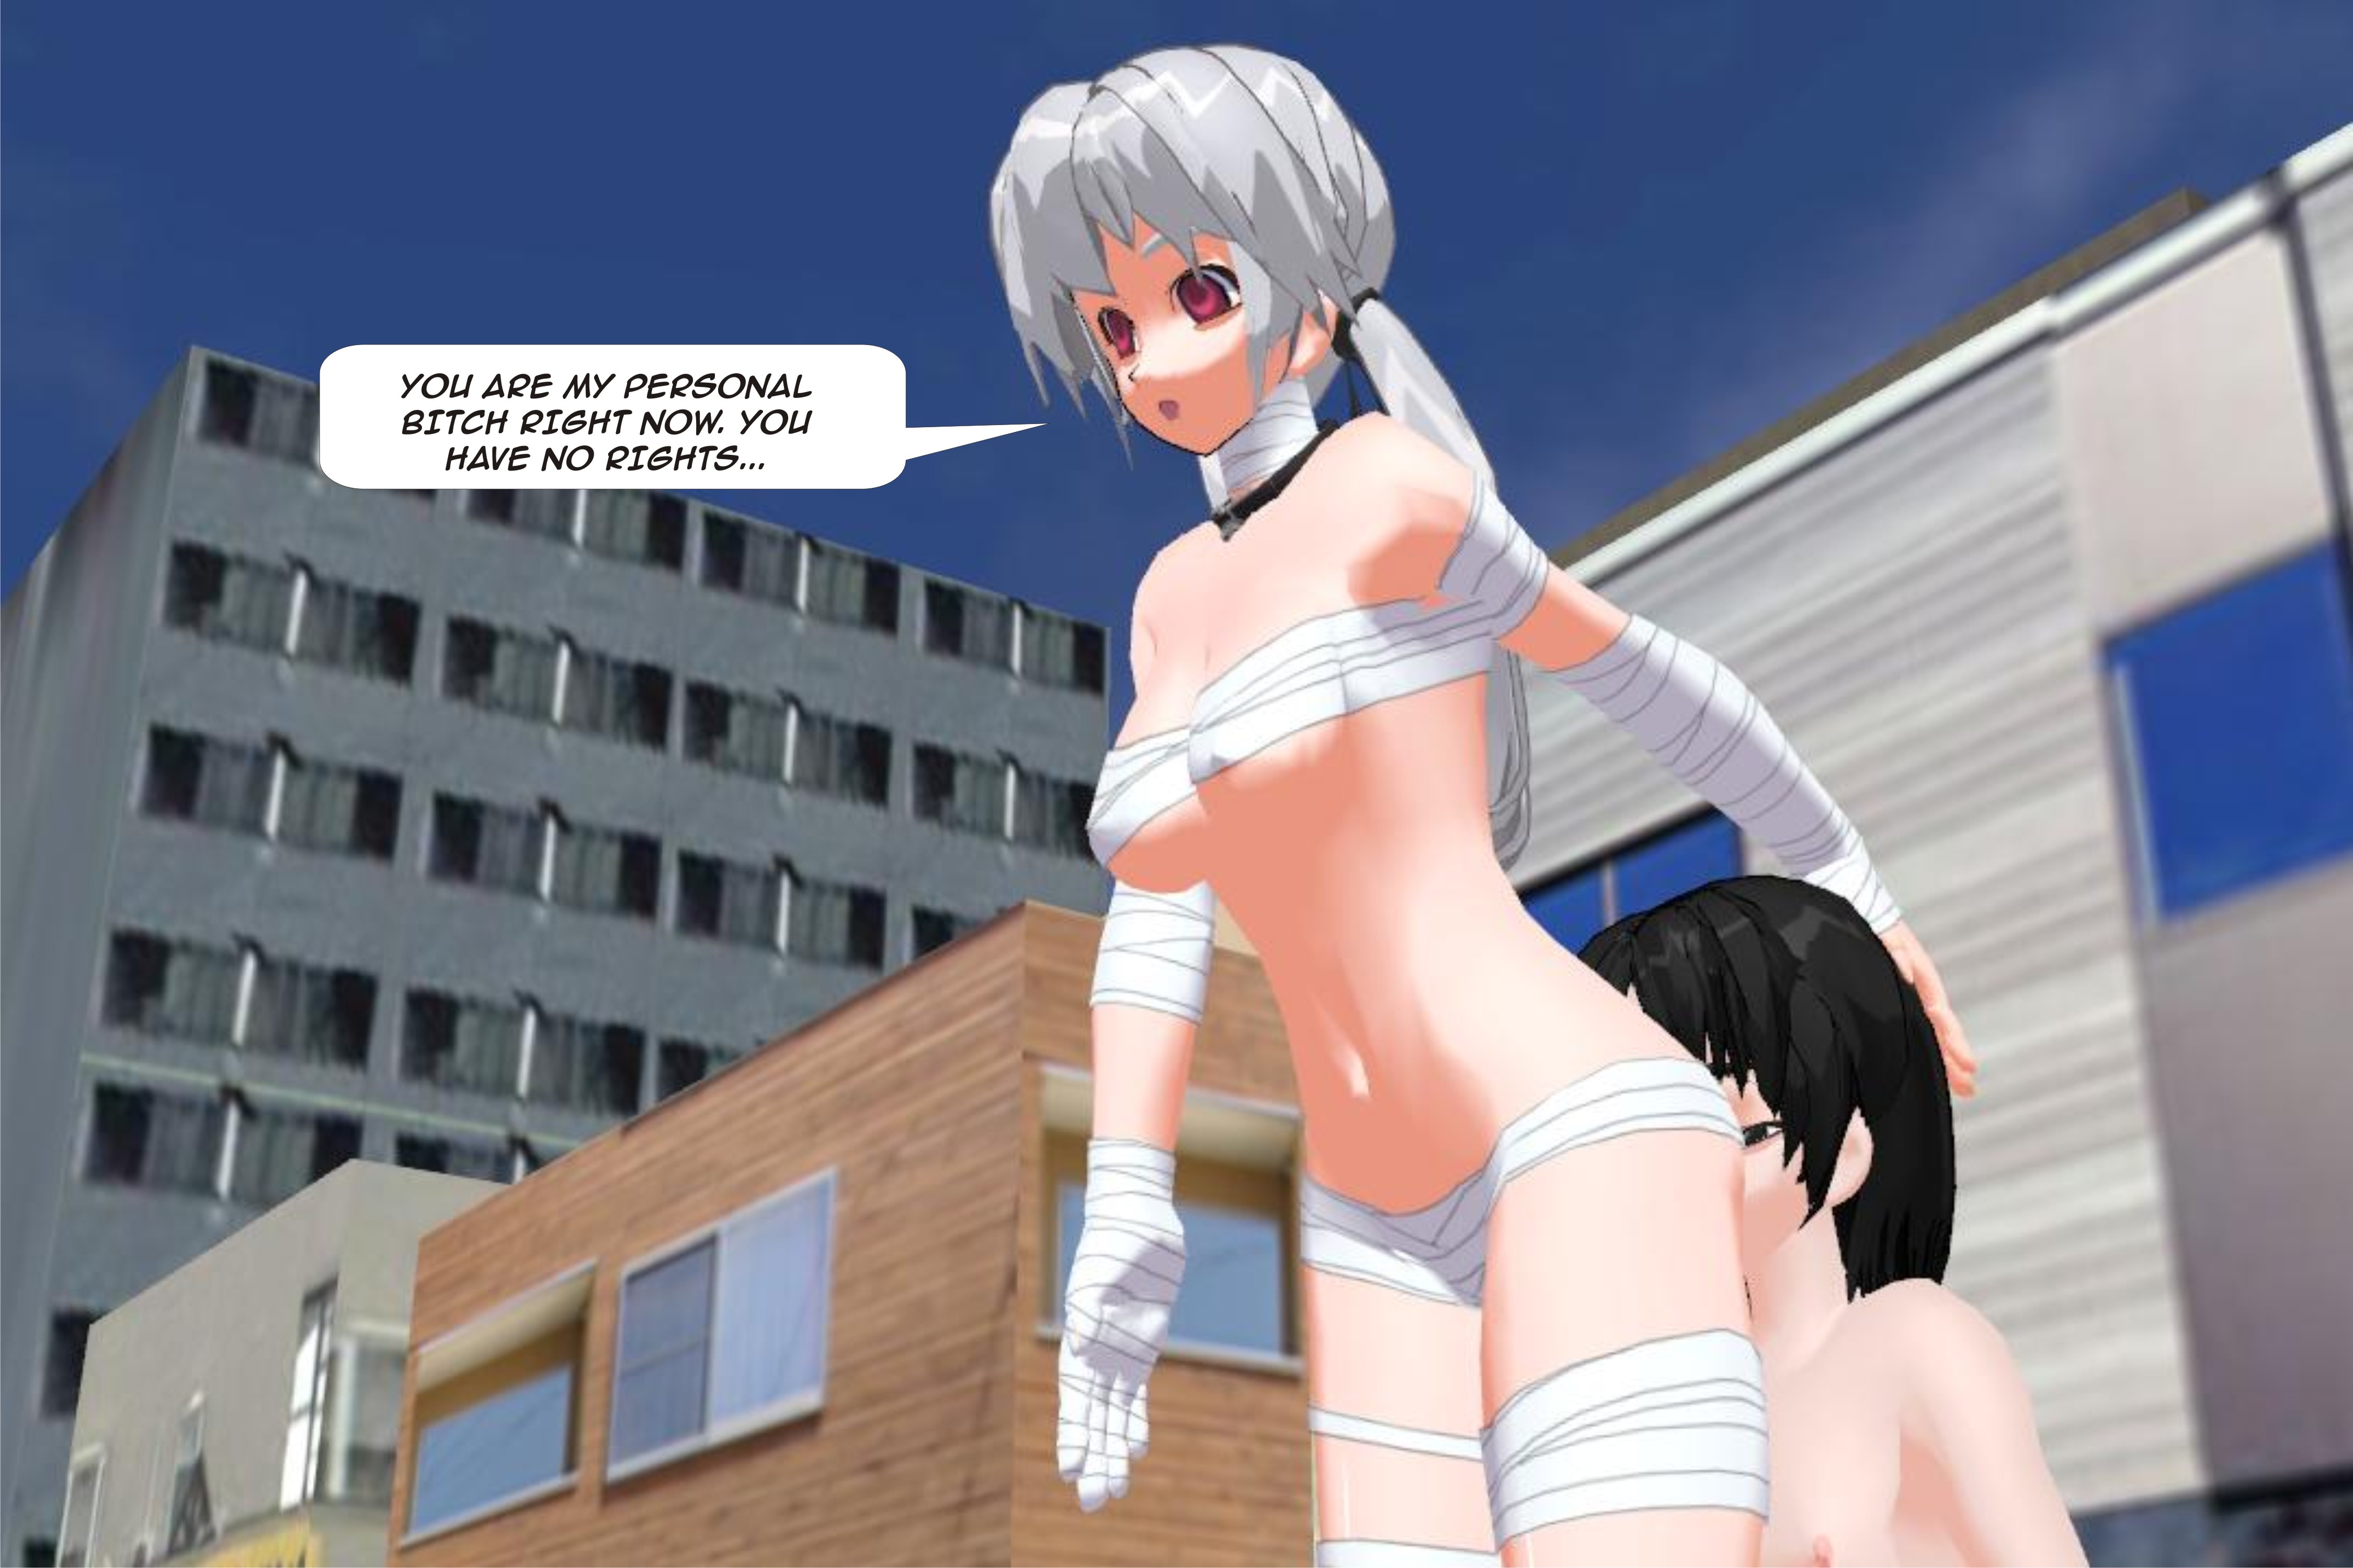 Mmd - The adventures of mike the mad chapter 3 - The mad rises COMIC